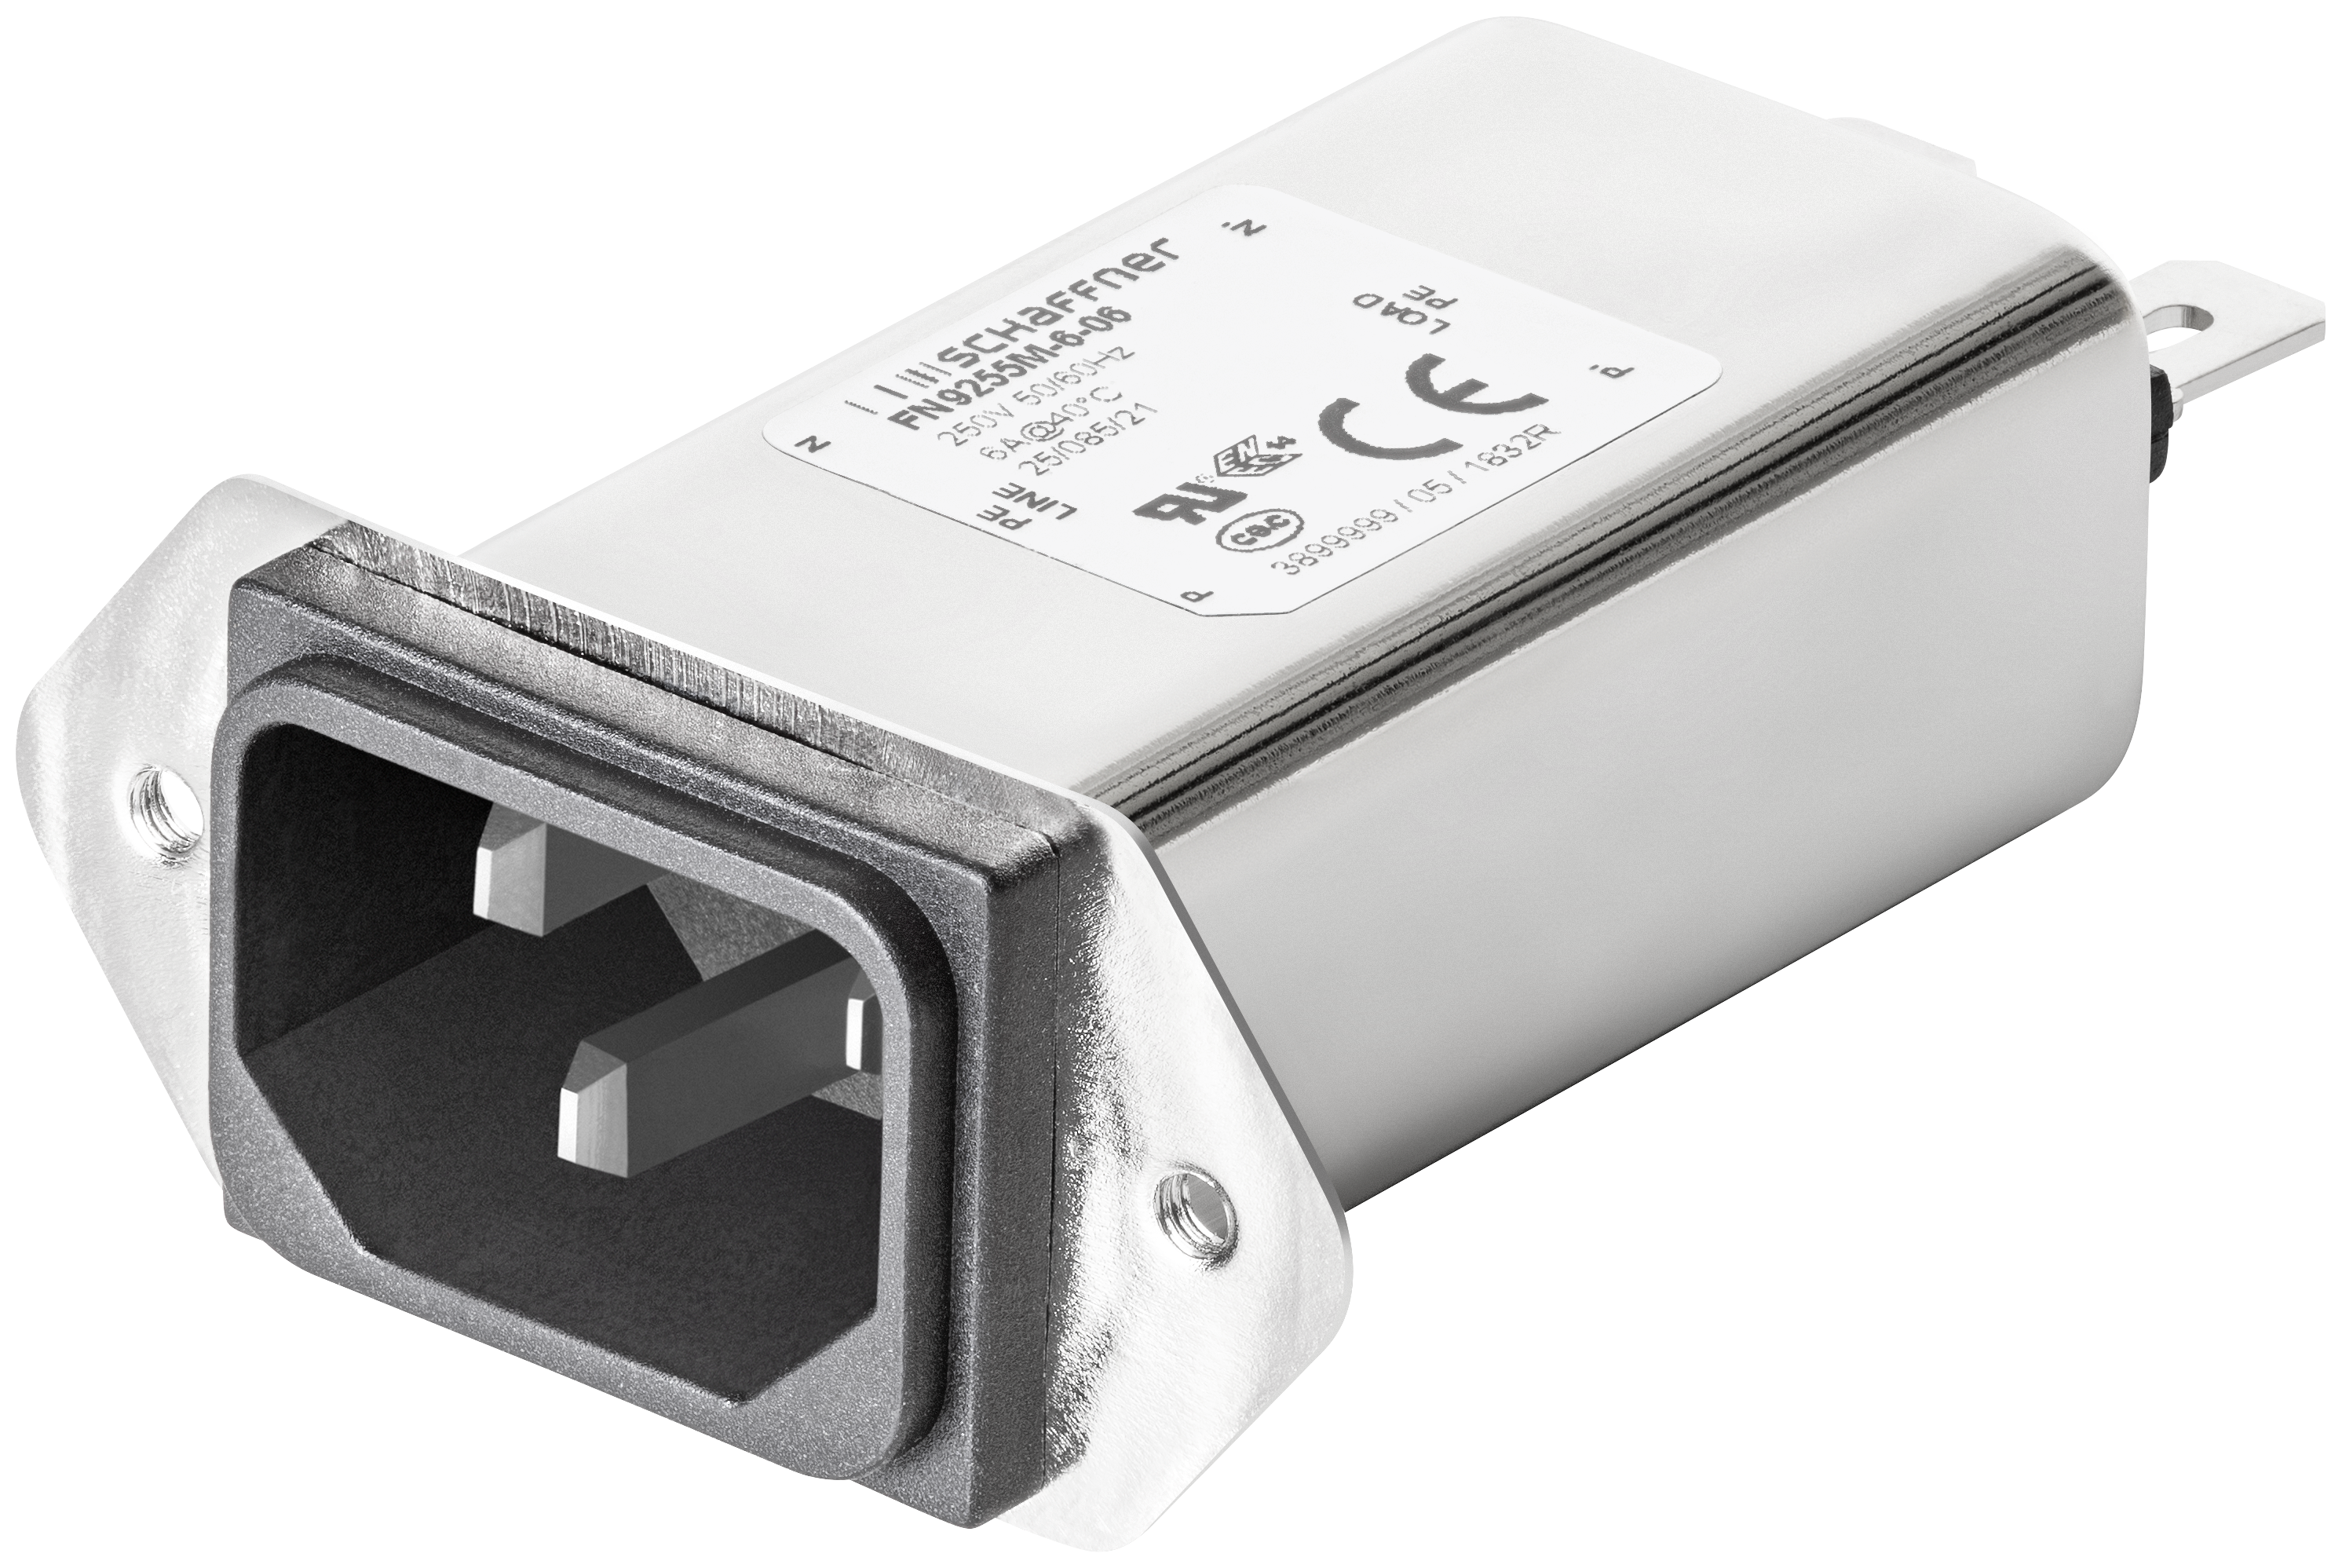 Schaffner introduces new Series of RFI filters with IEC inlet